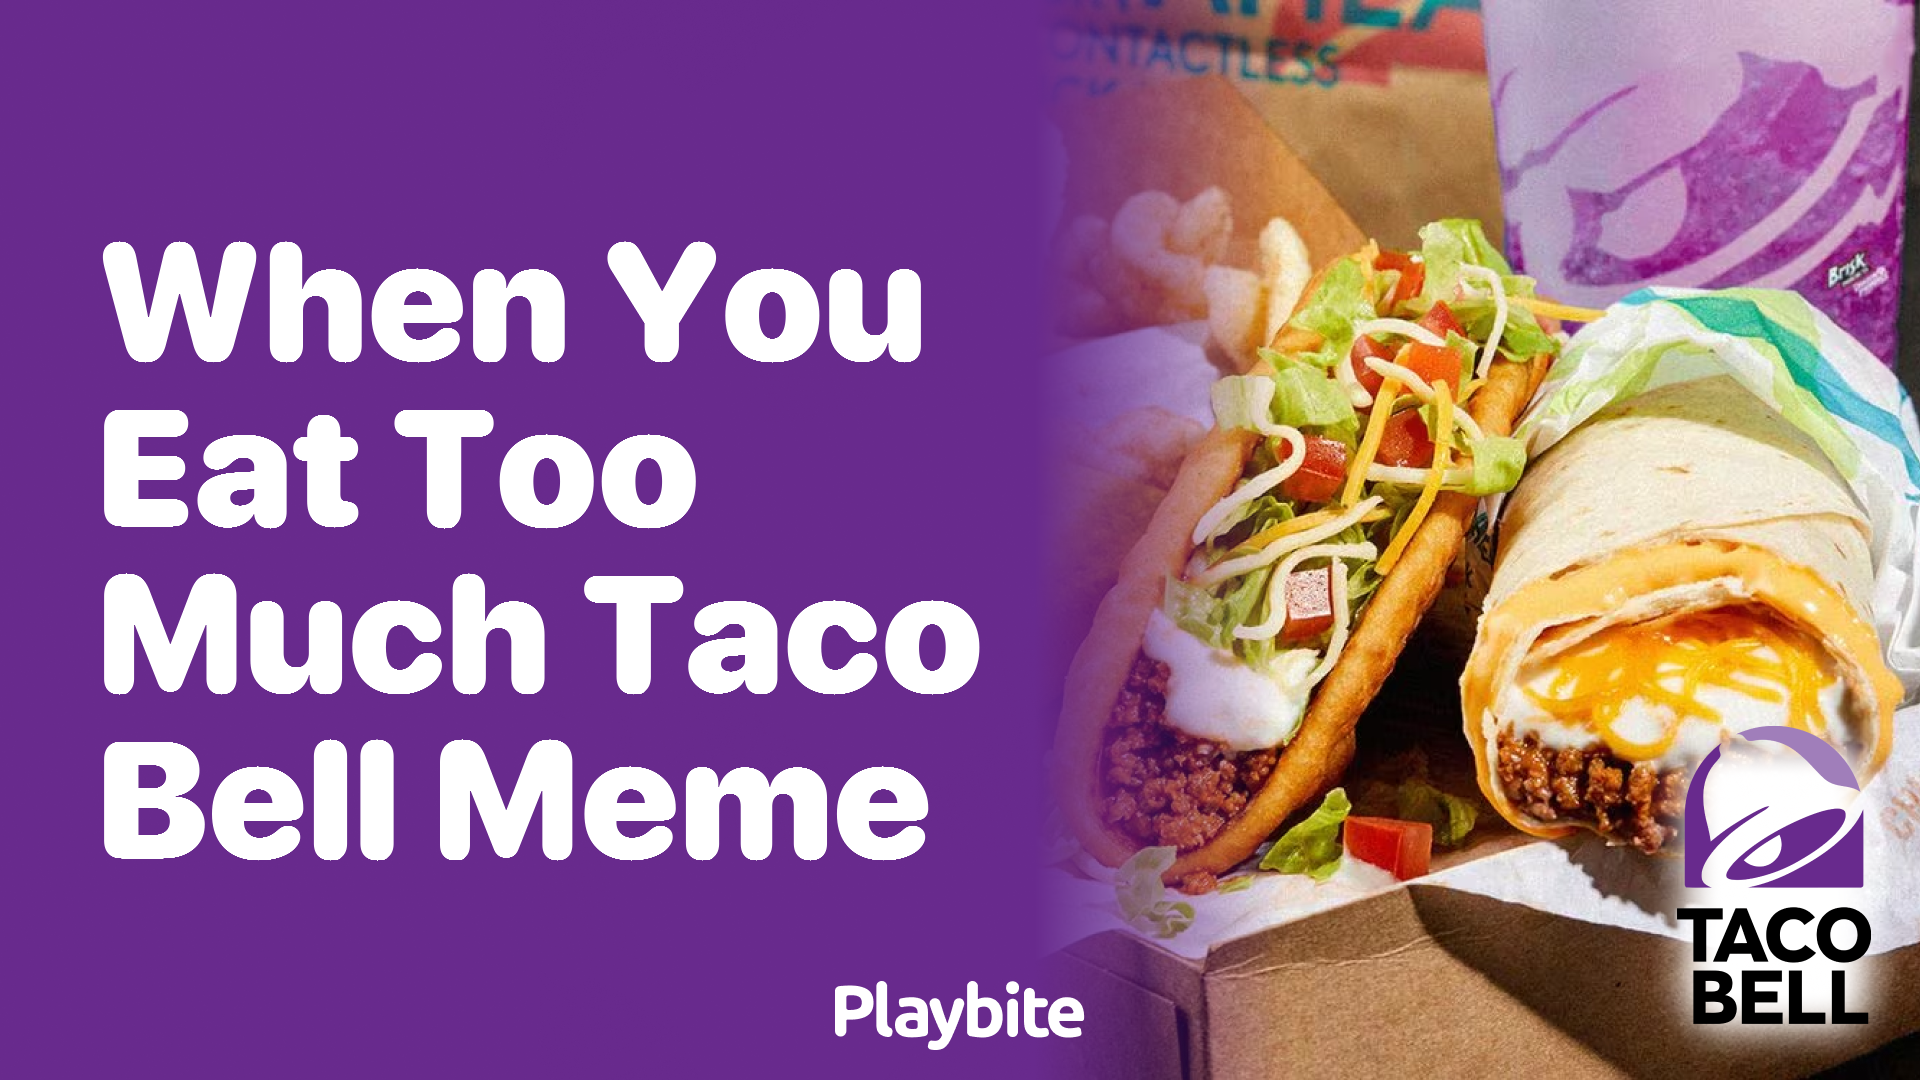 When You Eat Too Much Taco Bell: Funny Meme Explained!